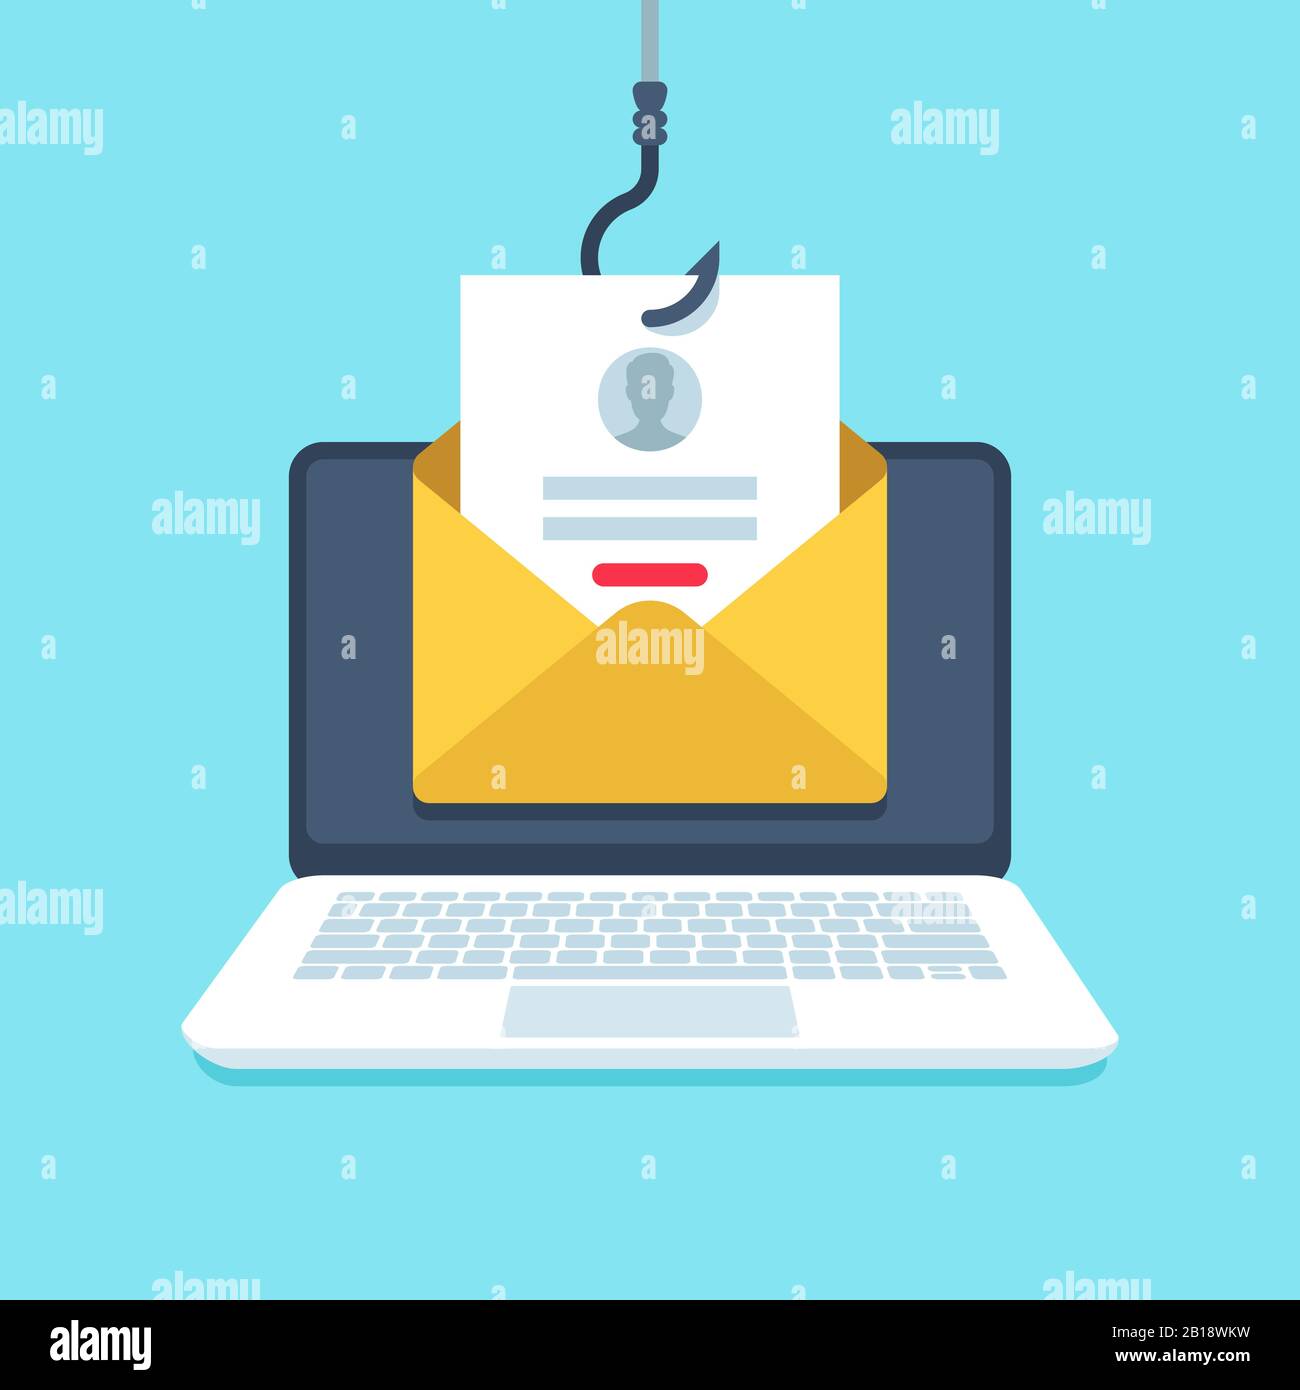 Phishing email. Forgery login page, email on hook, malware privacy protection vector concept illustration Stock Vector